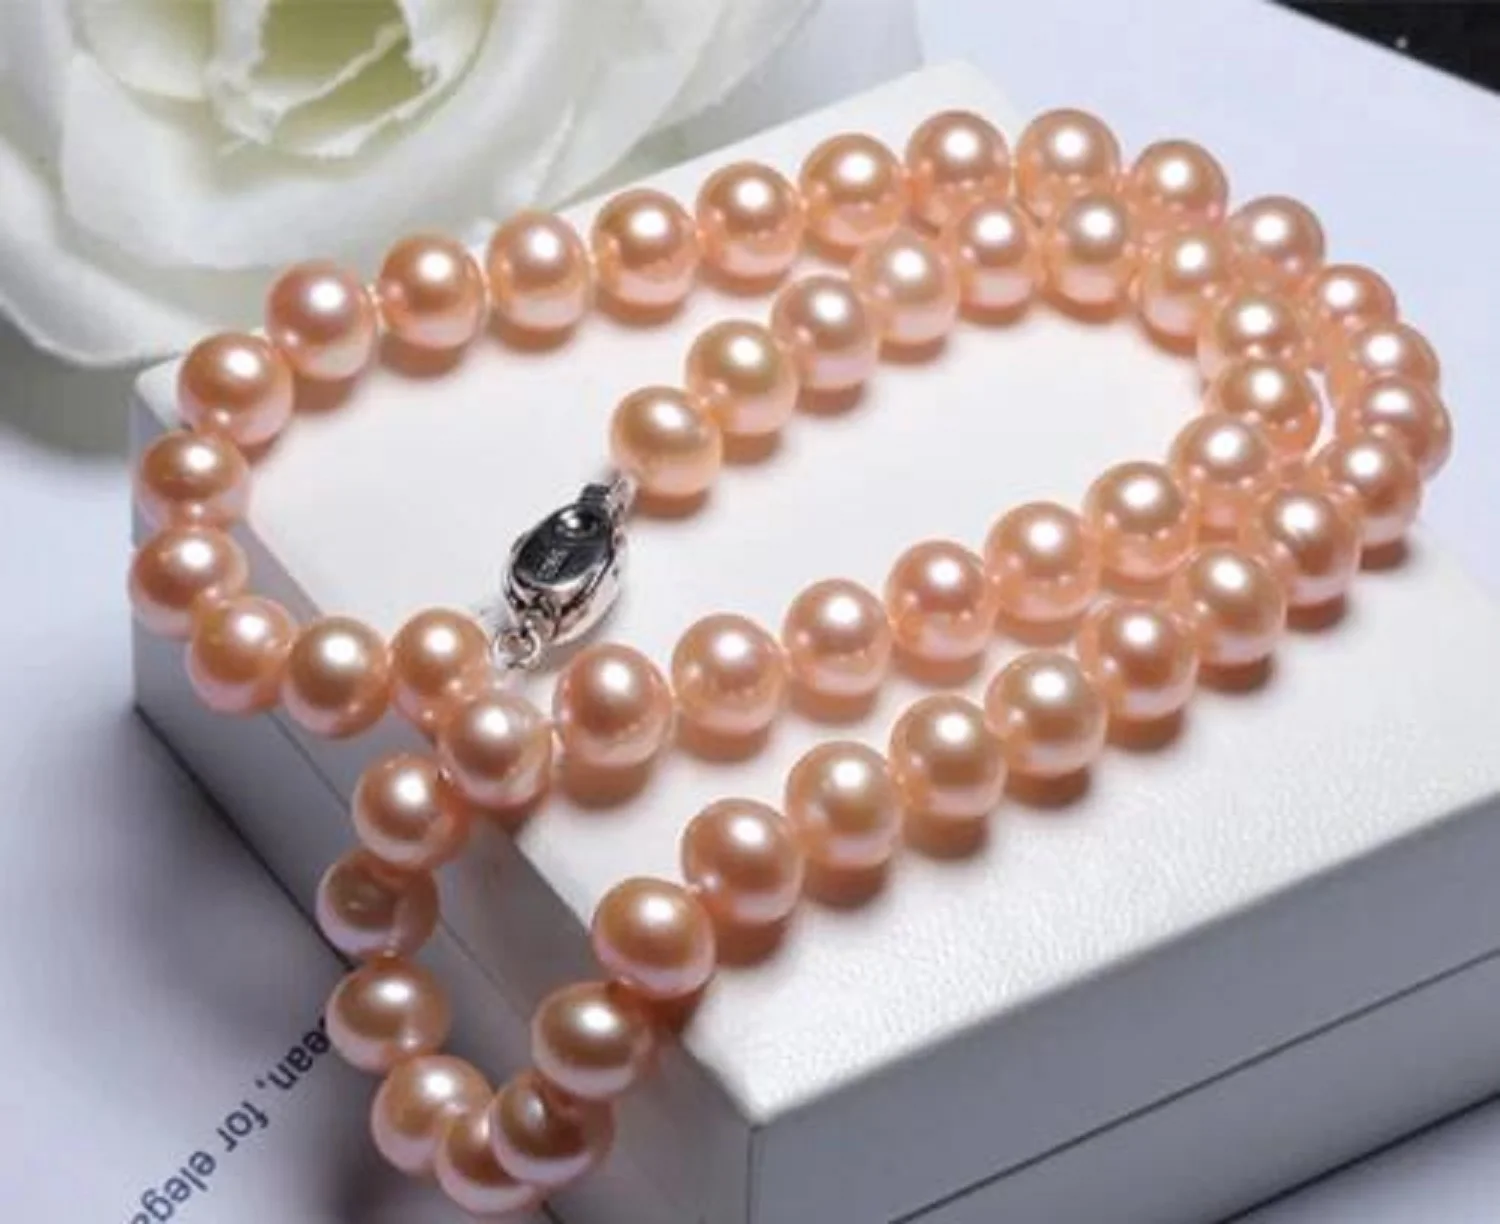 Hand knotted, sturdy Top Grading AAAA++ Gorgeous 9-10mm real natural south sea pink pearl necklace 16in